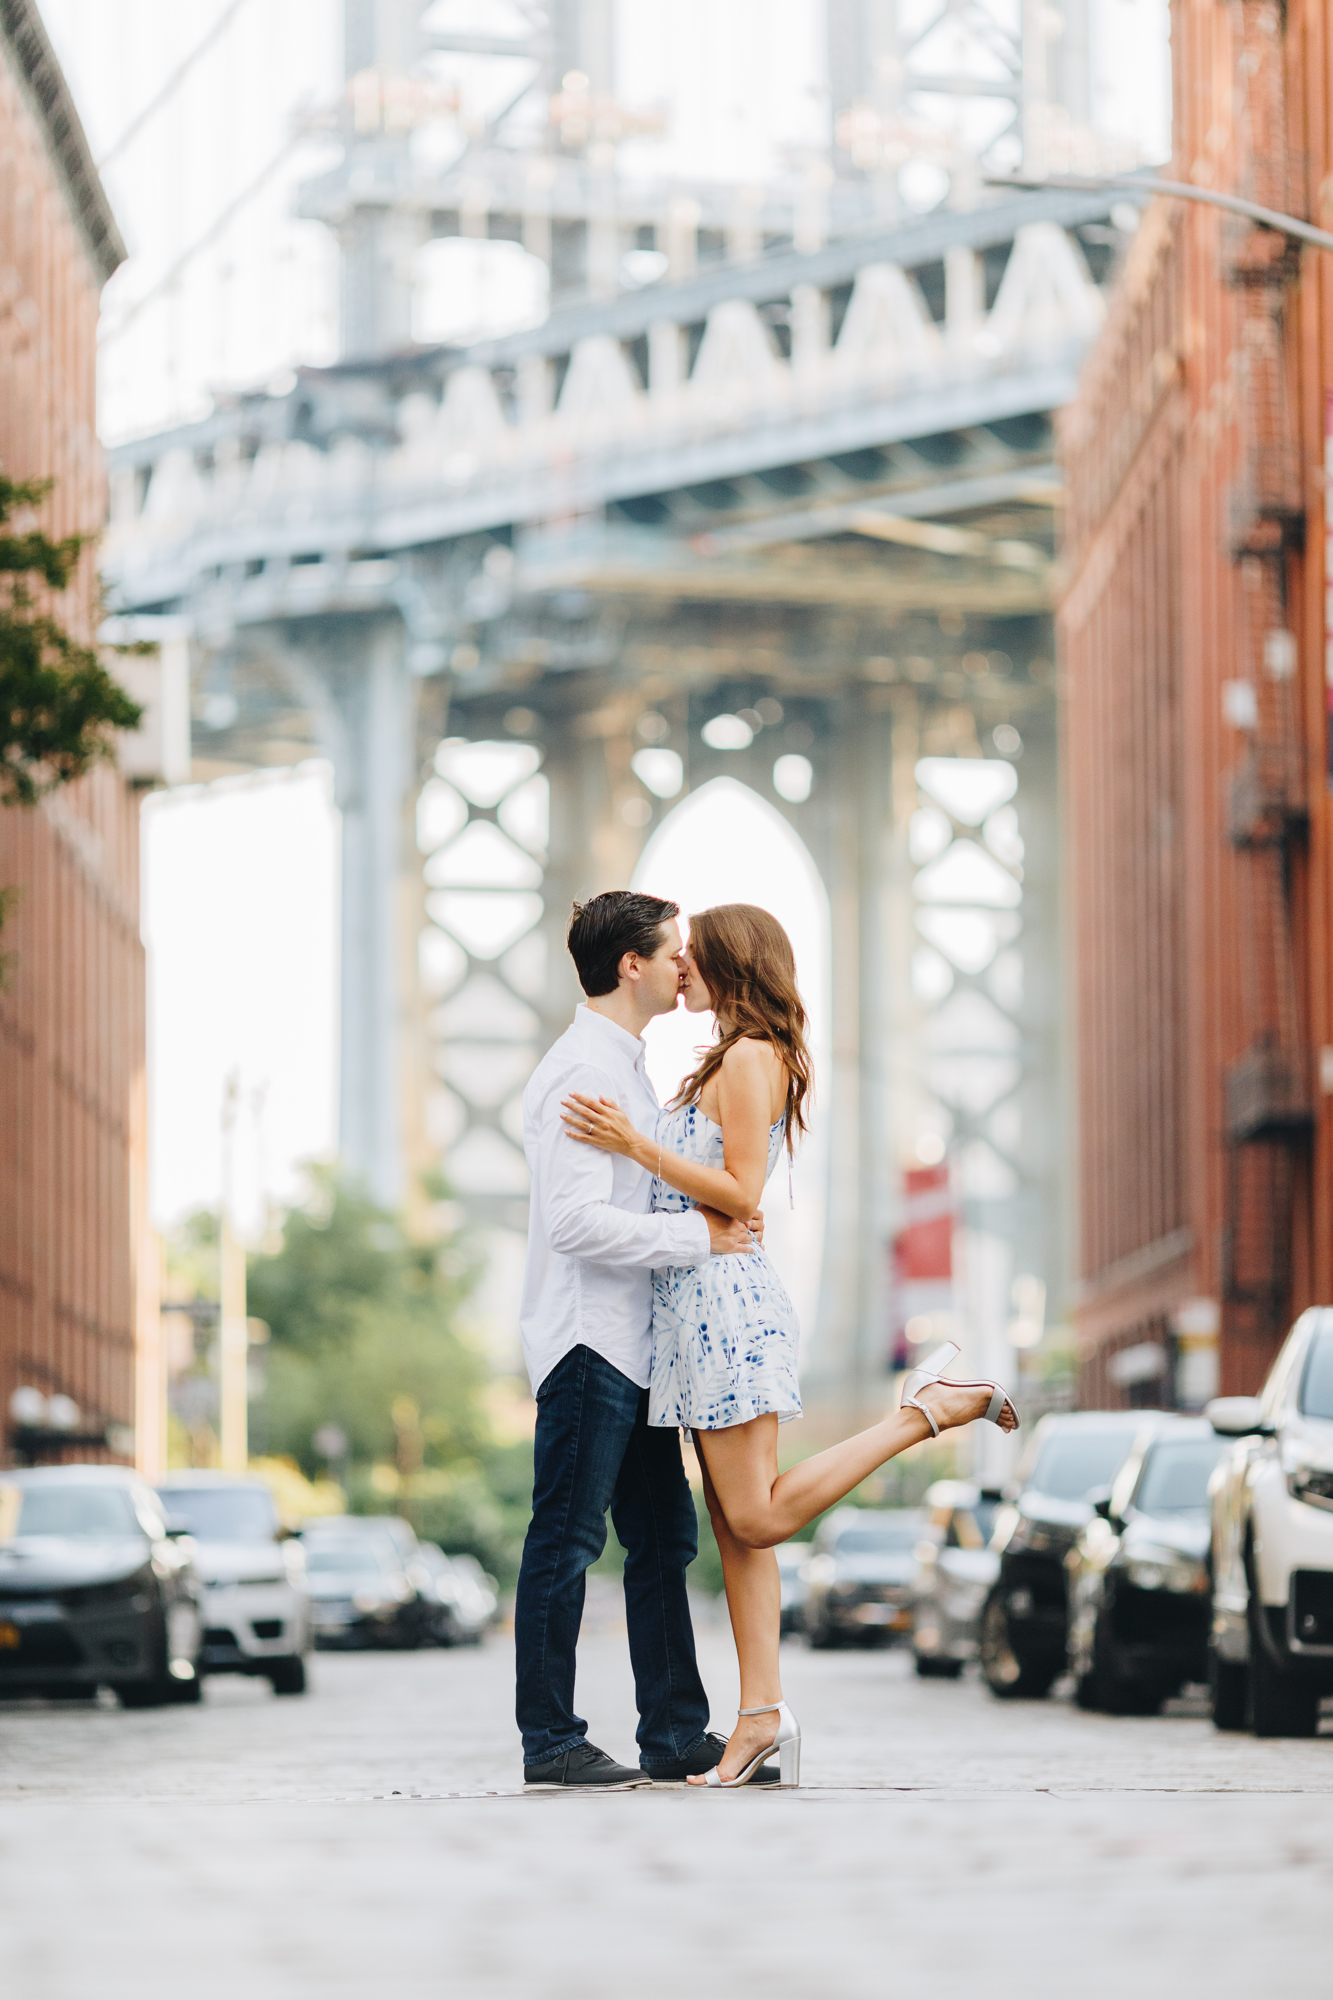 Engagement photos with the Manhattan Bridge in the background